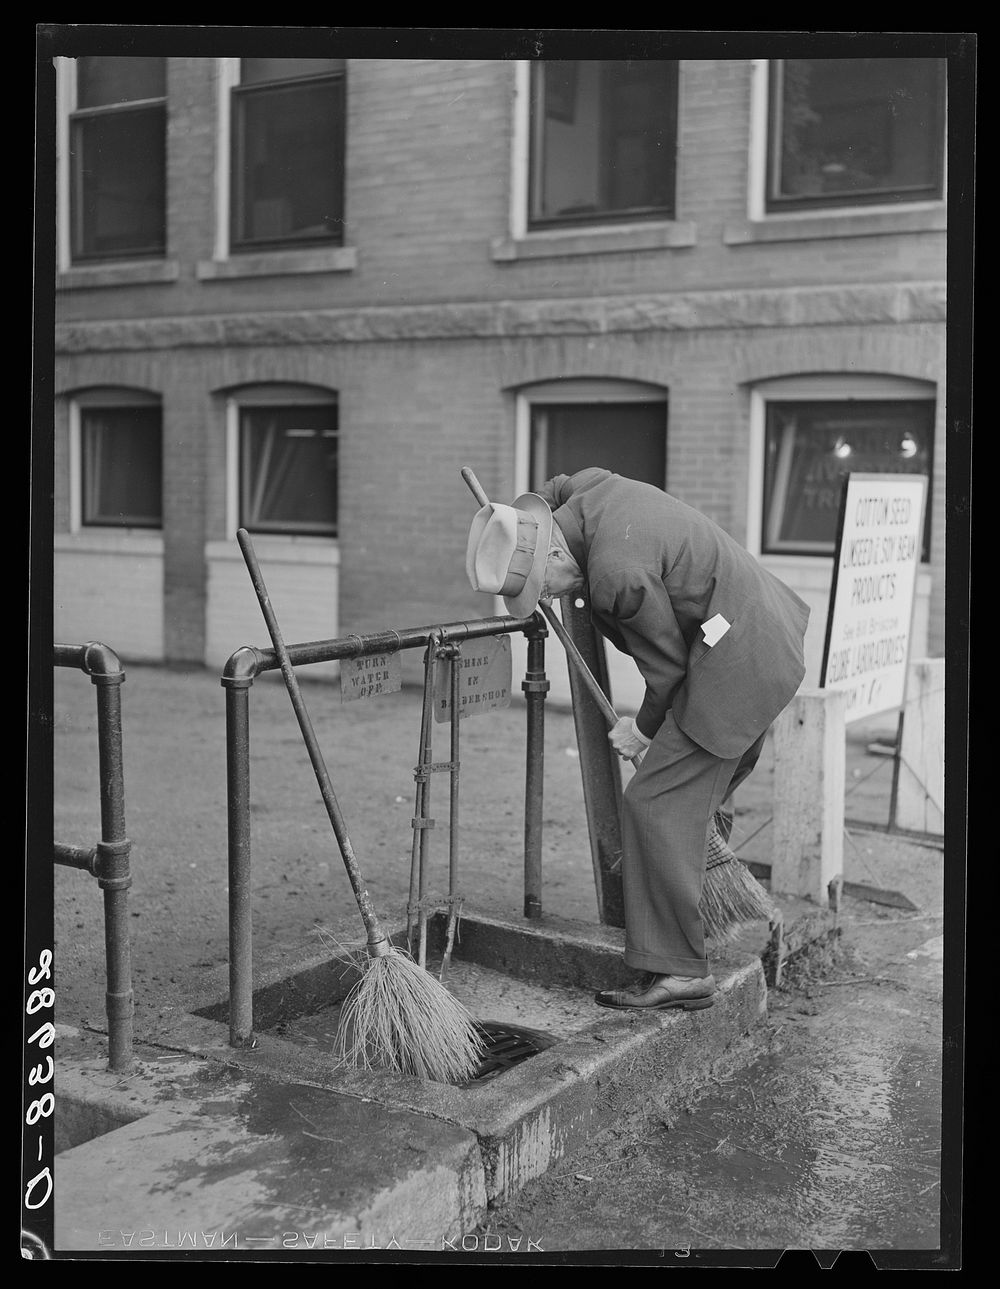 Cattle buyer cleaning his shoes after trip through the stockyards. Denver, Colorado. Sourced from the Library of Congress.